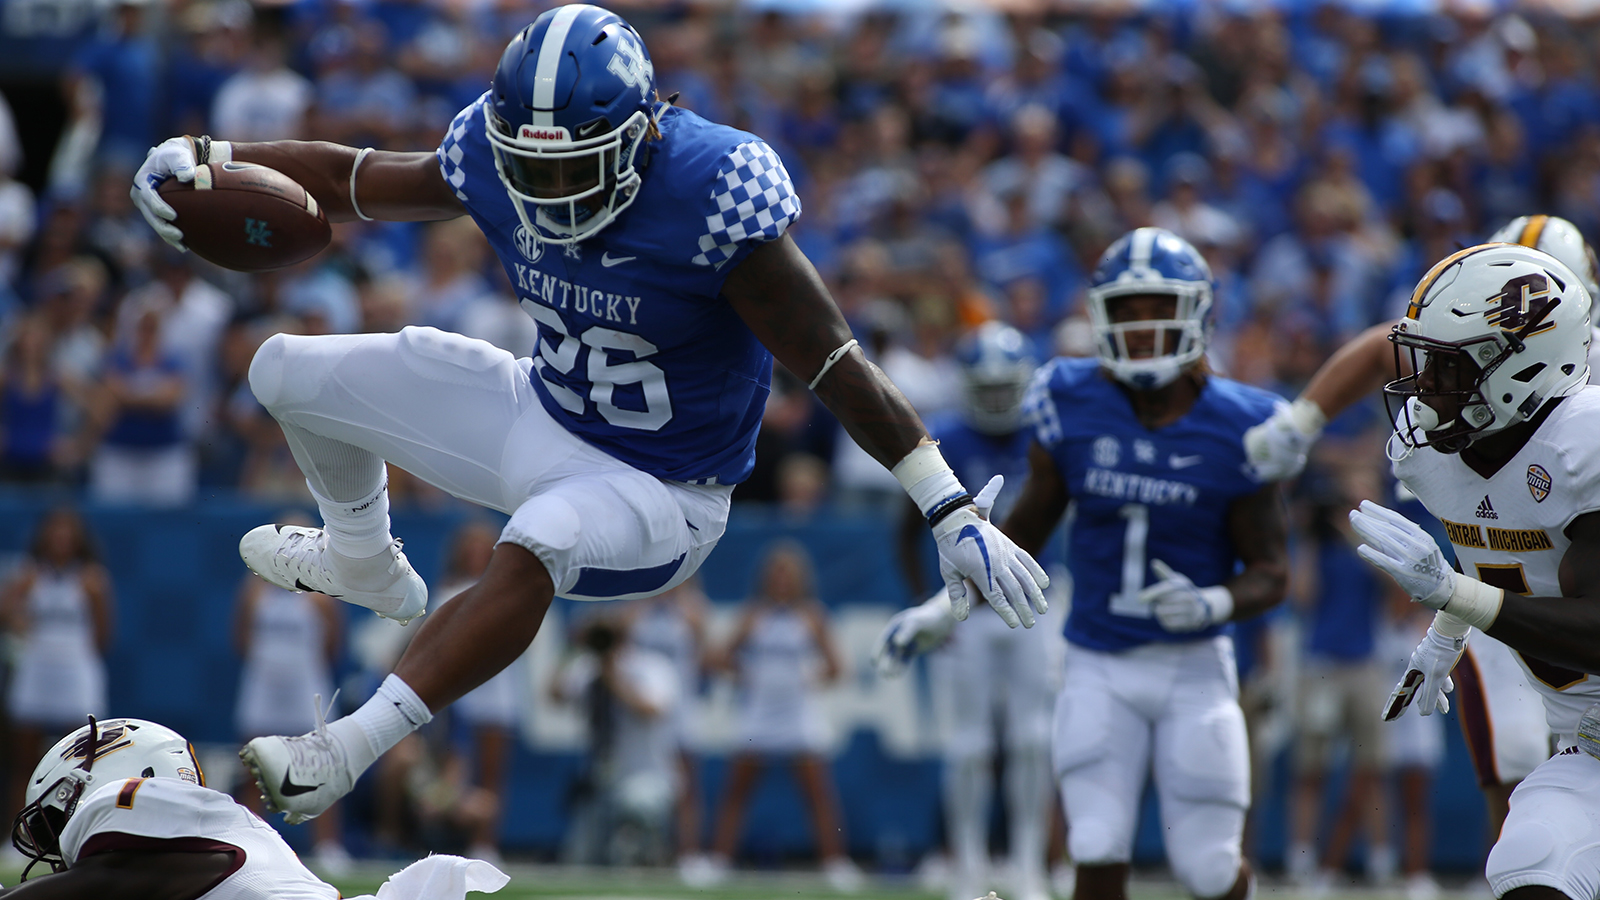 Kentucky-Murray State: TV, Radio and Online Coverage on Saturday